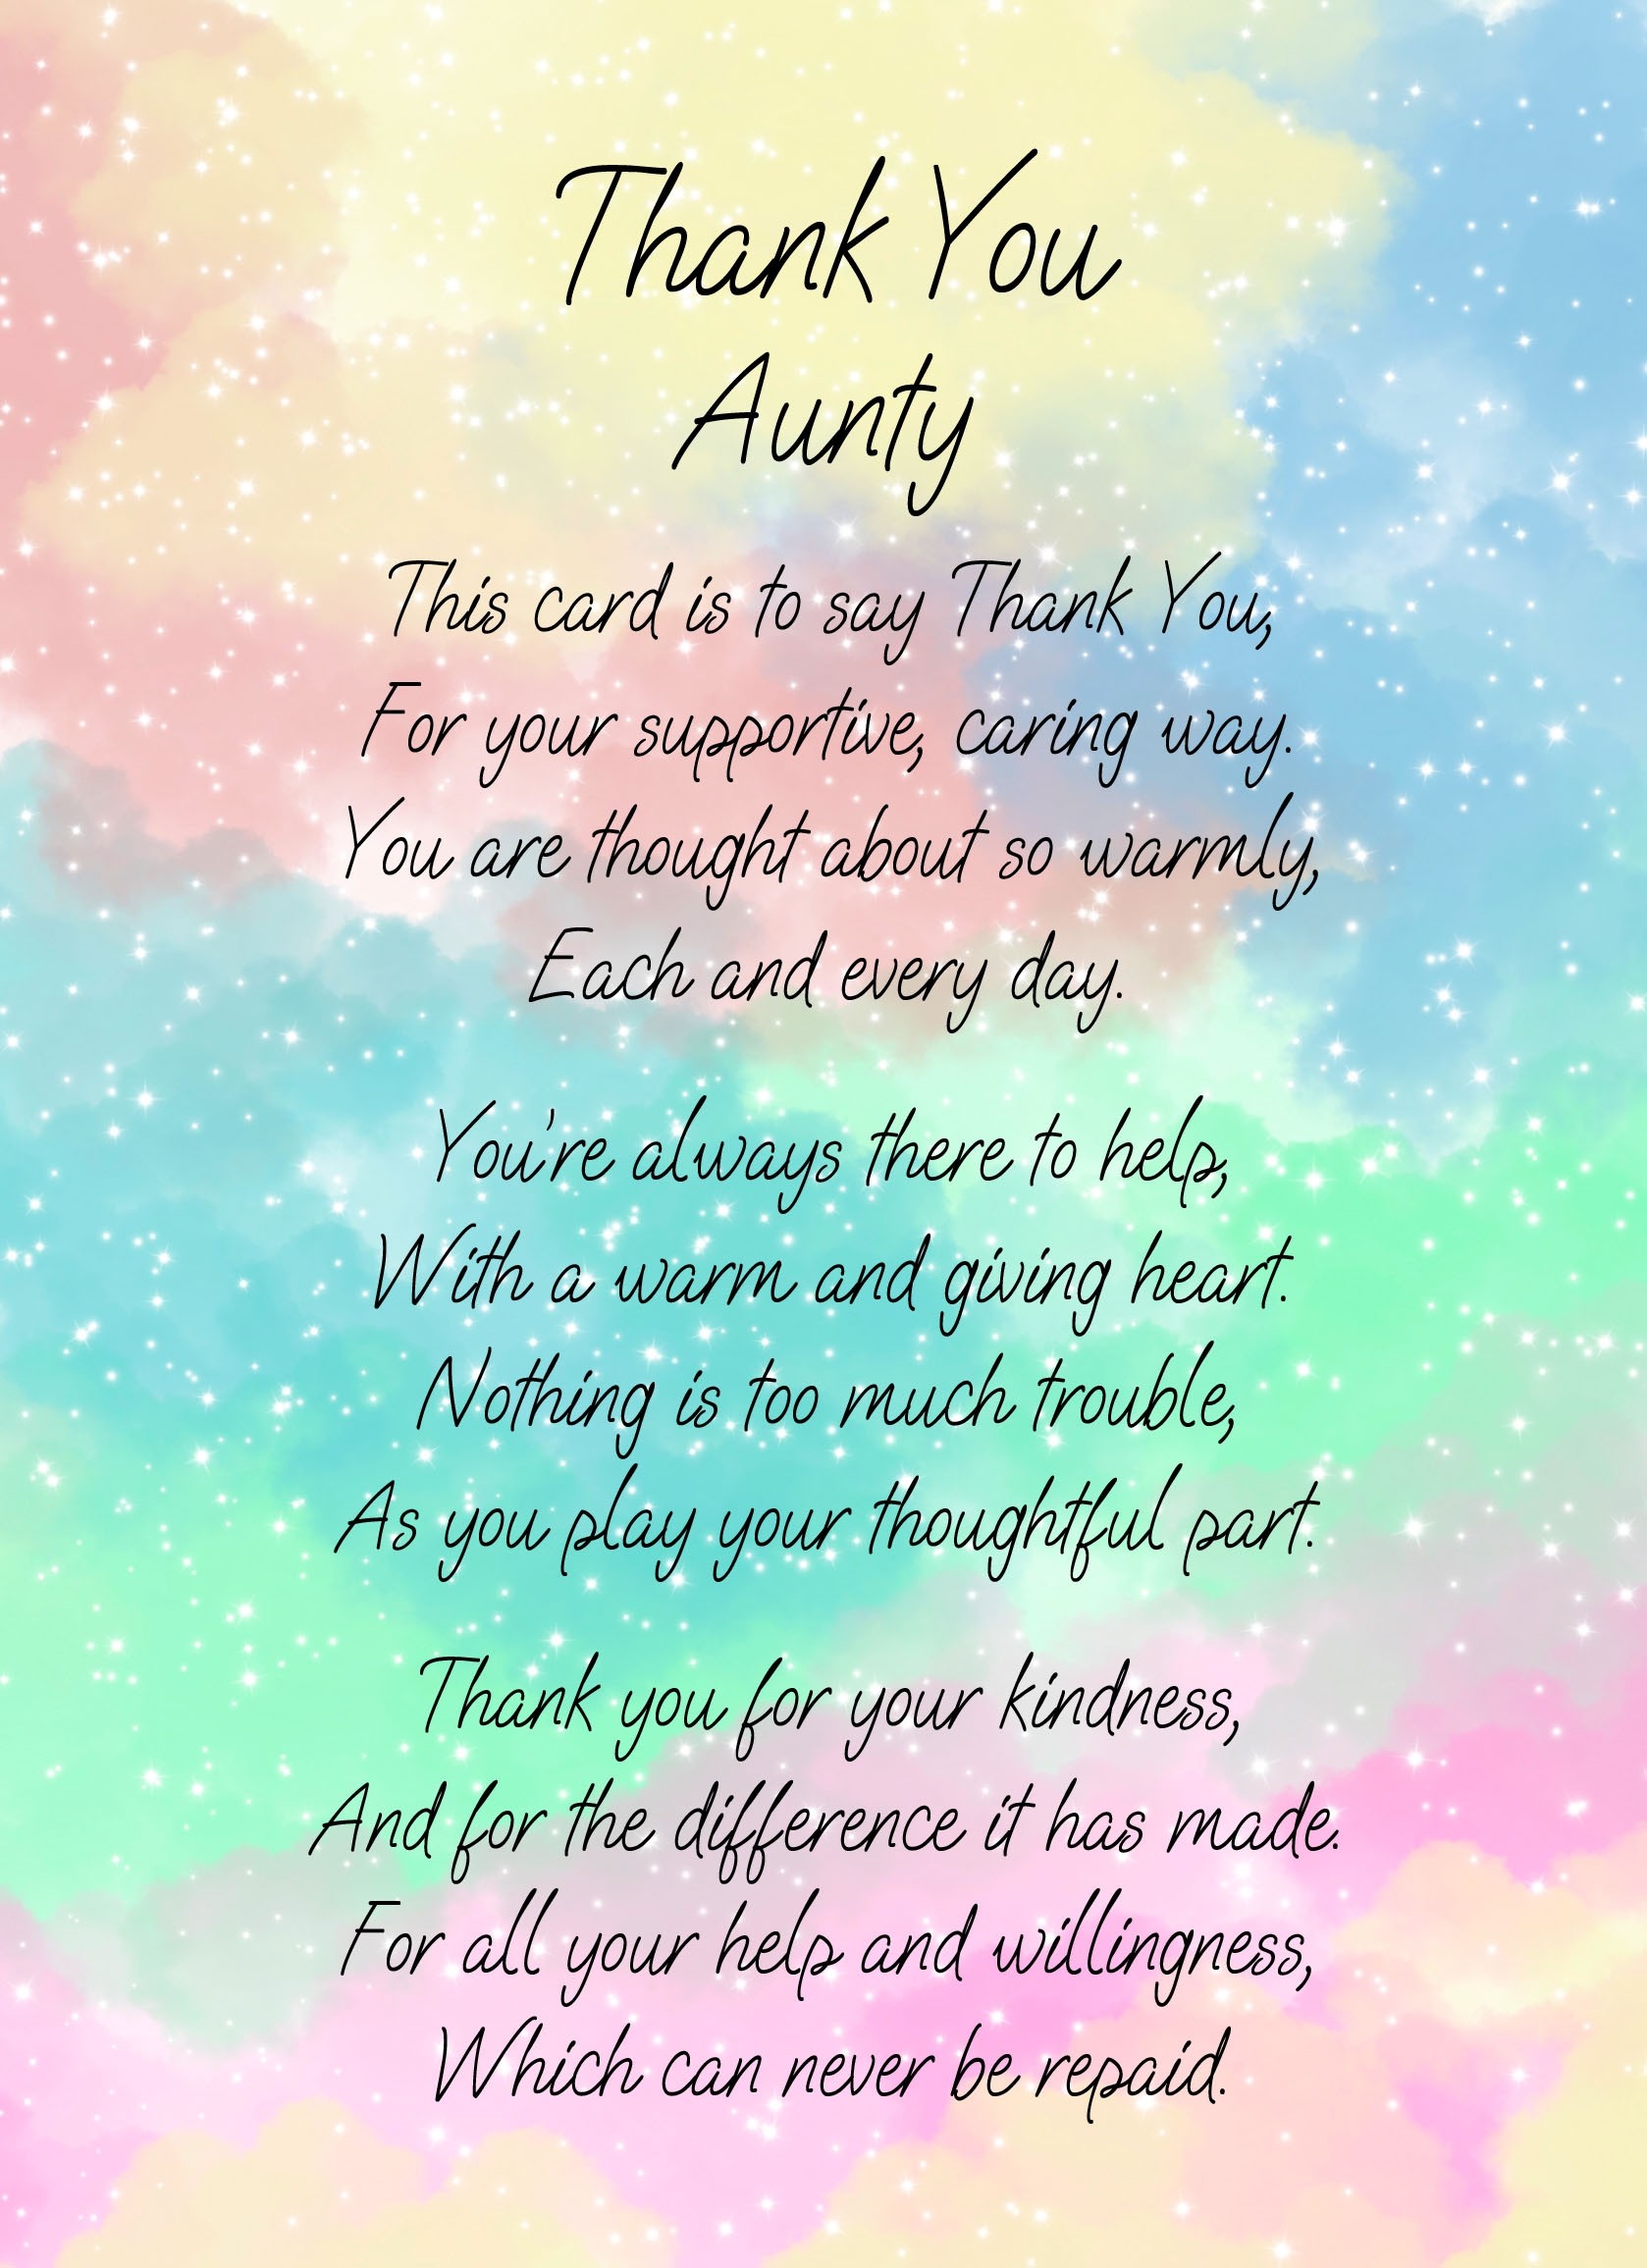 Thank You Poem Verse Card For Aunty